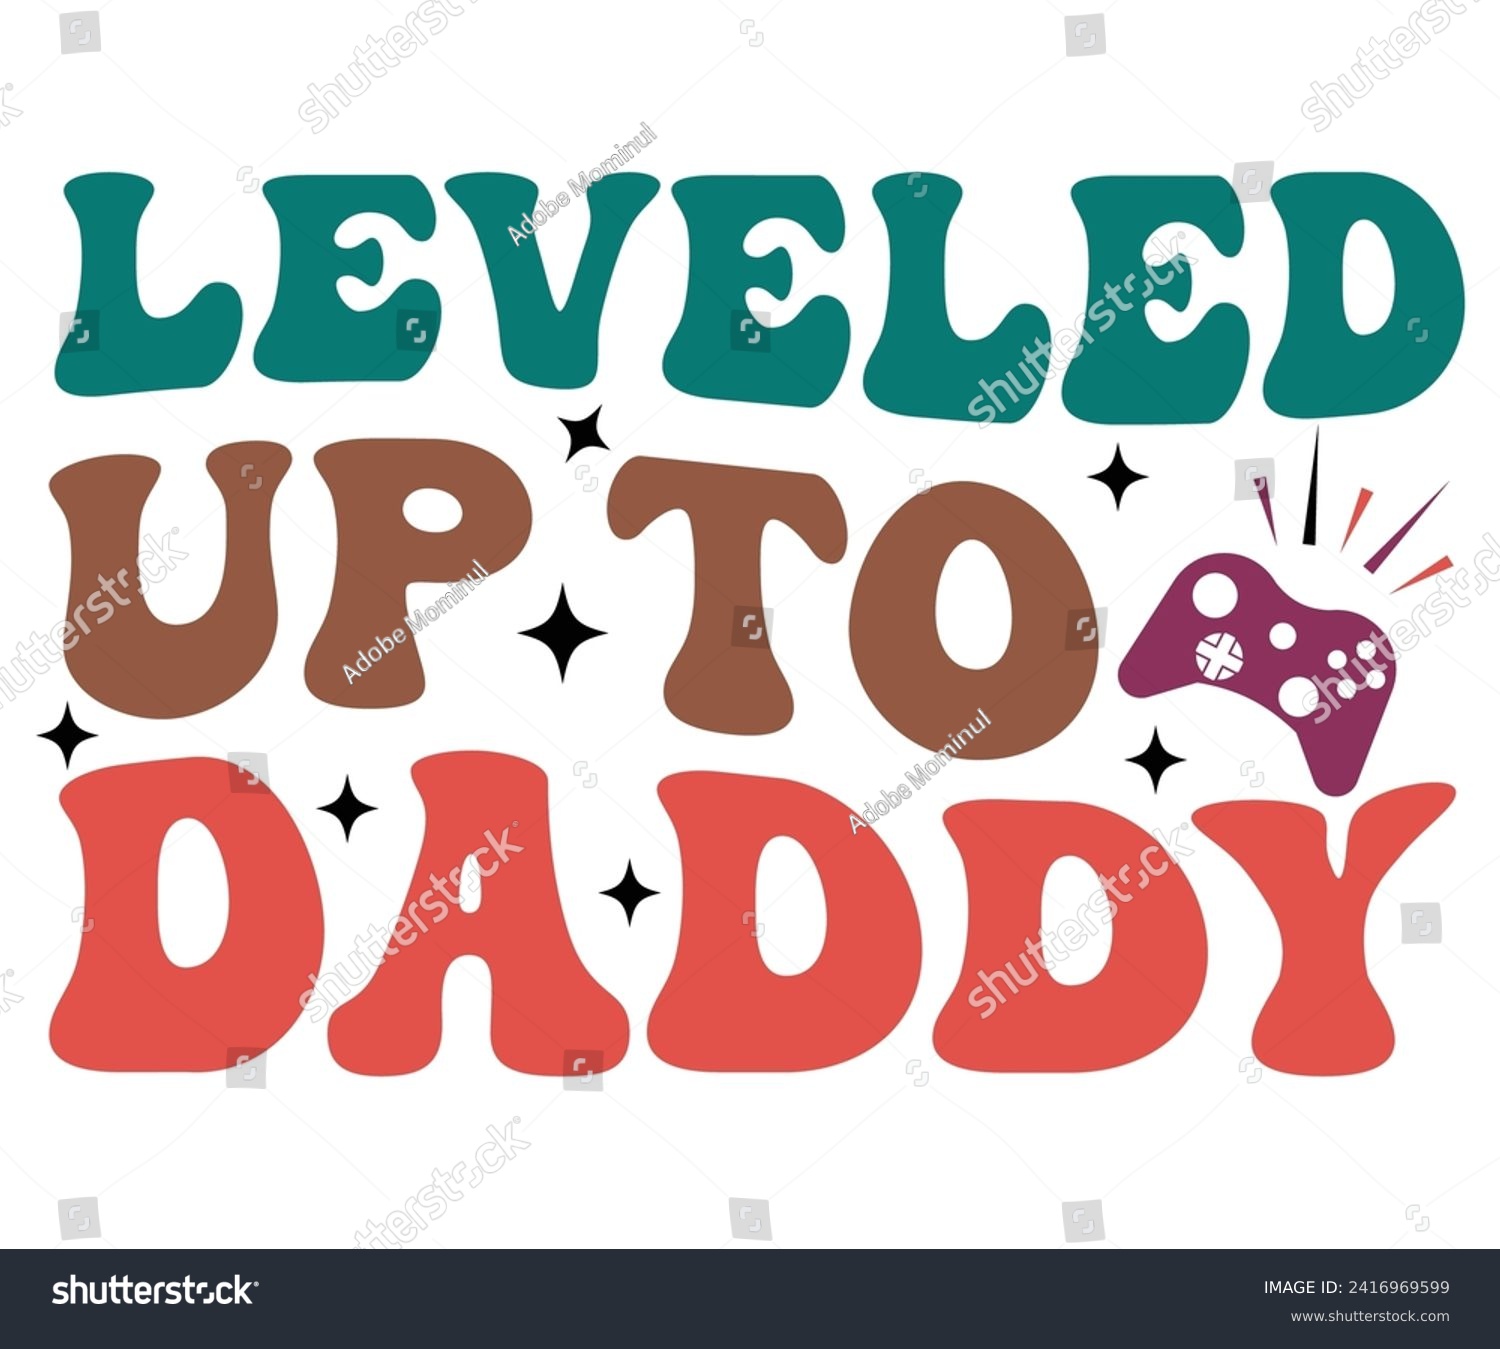 SVG of Leveled Up to Daddy Svg,Father's Day Svg,Papa svg,Grandpa Svg,Father's Day Saying Qoutes,Dad Svg,Funny Father, Gift For Dad Svg,Daddy Svg,Family Svg,T shirt Design,Svg Cut File,Typography svg